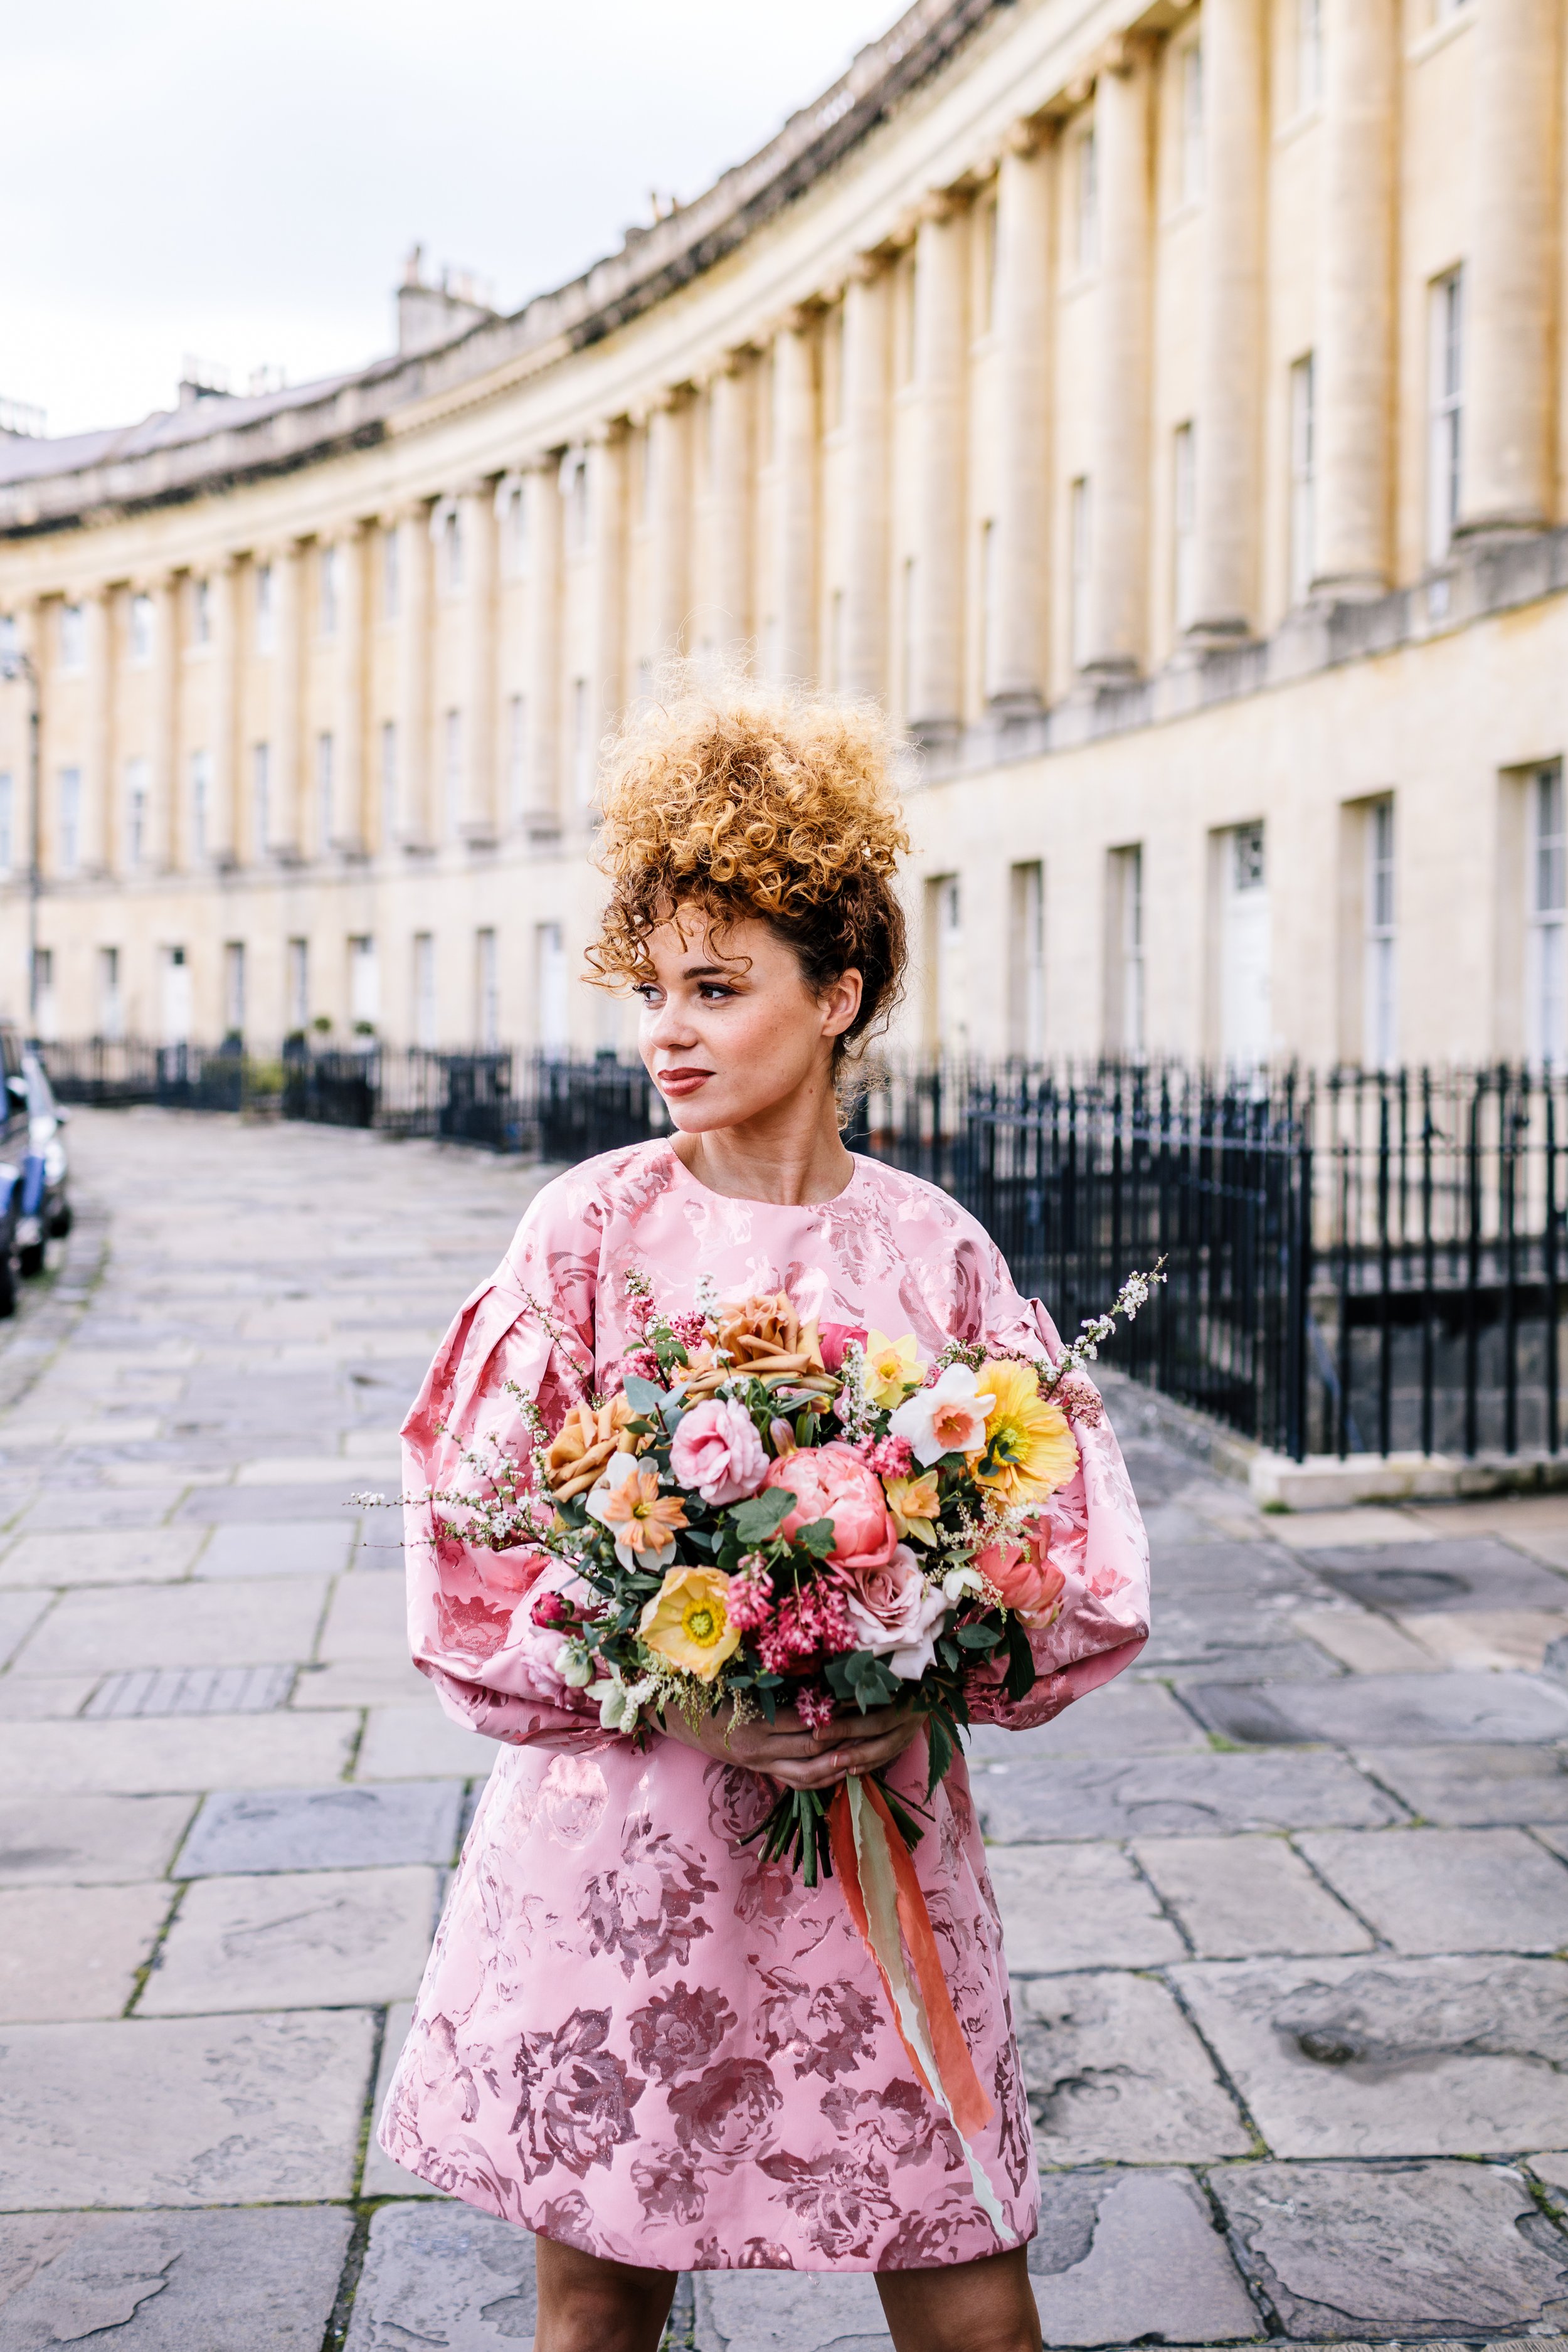 Wedding flowers course photoshoot bride against the iconic Royal Crescent